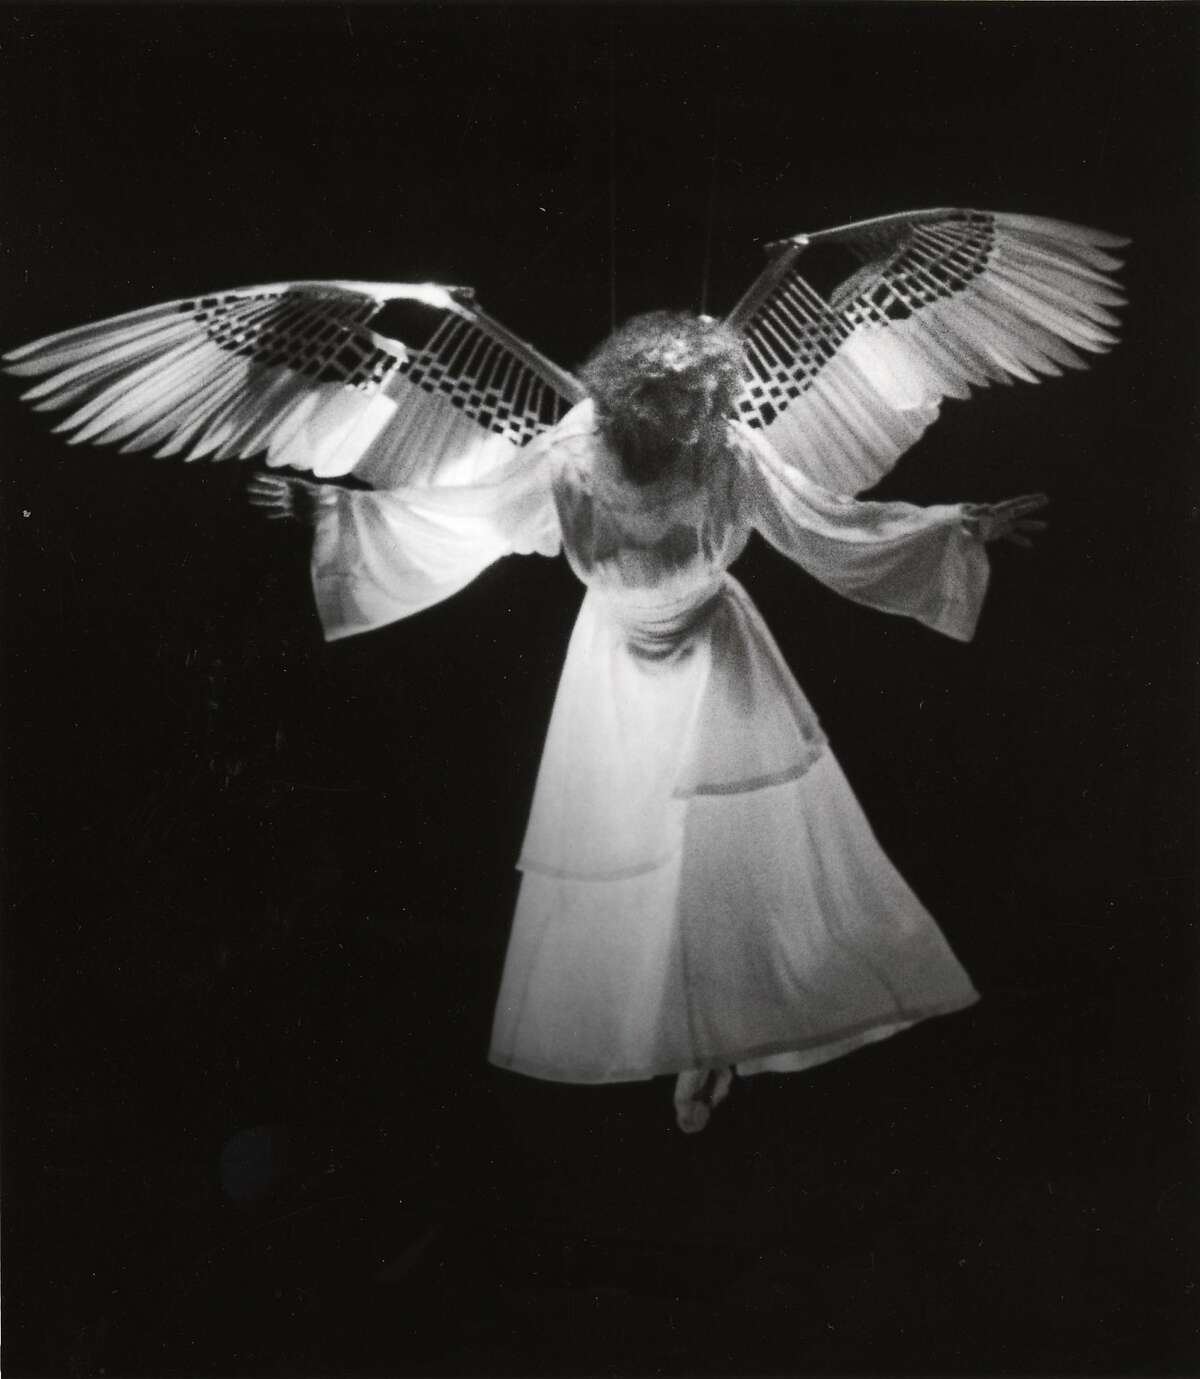 The Angel (Ellen McLaughlin) arrives in the world premiere of "Angels in America," Eureka Theatre Company, San Francisco, 1991. These original wings, designed by Sandra Woodall, will be on display in the exhibition. Credit: Katy Raddatz/Museum of Performance & Design